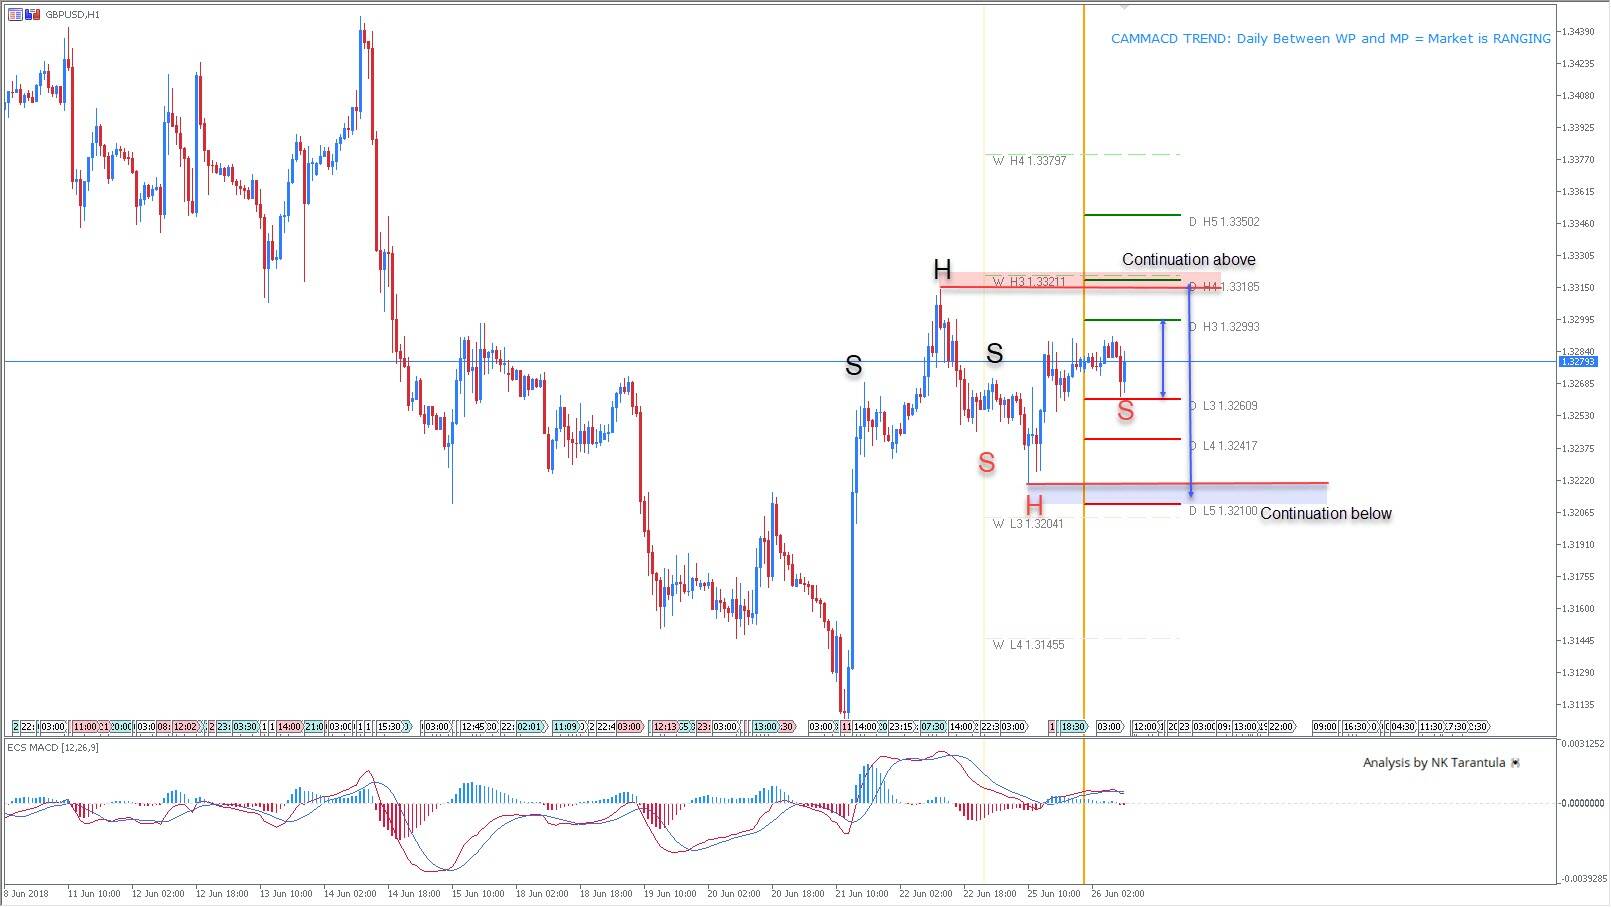 GBP/USD Multiple Patterns Hint for a Range Bound Price Action